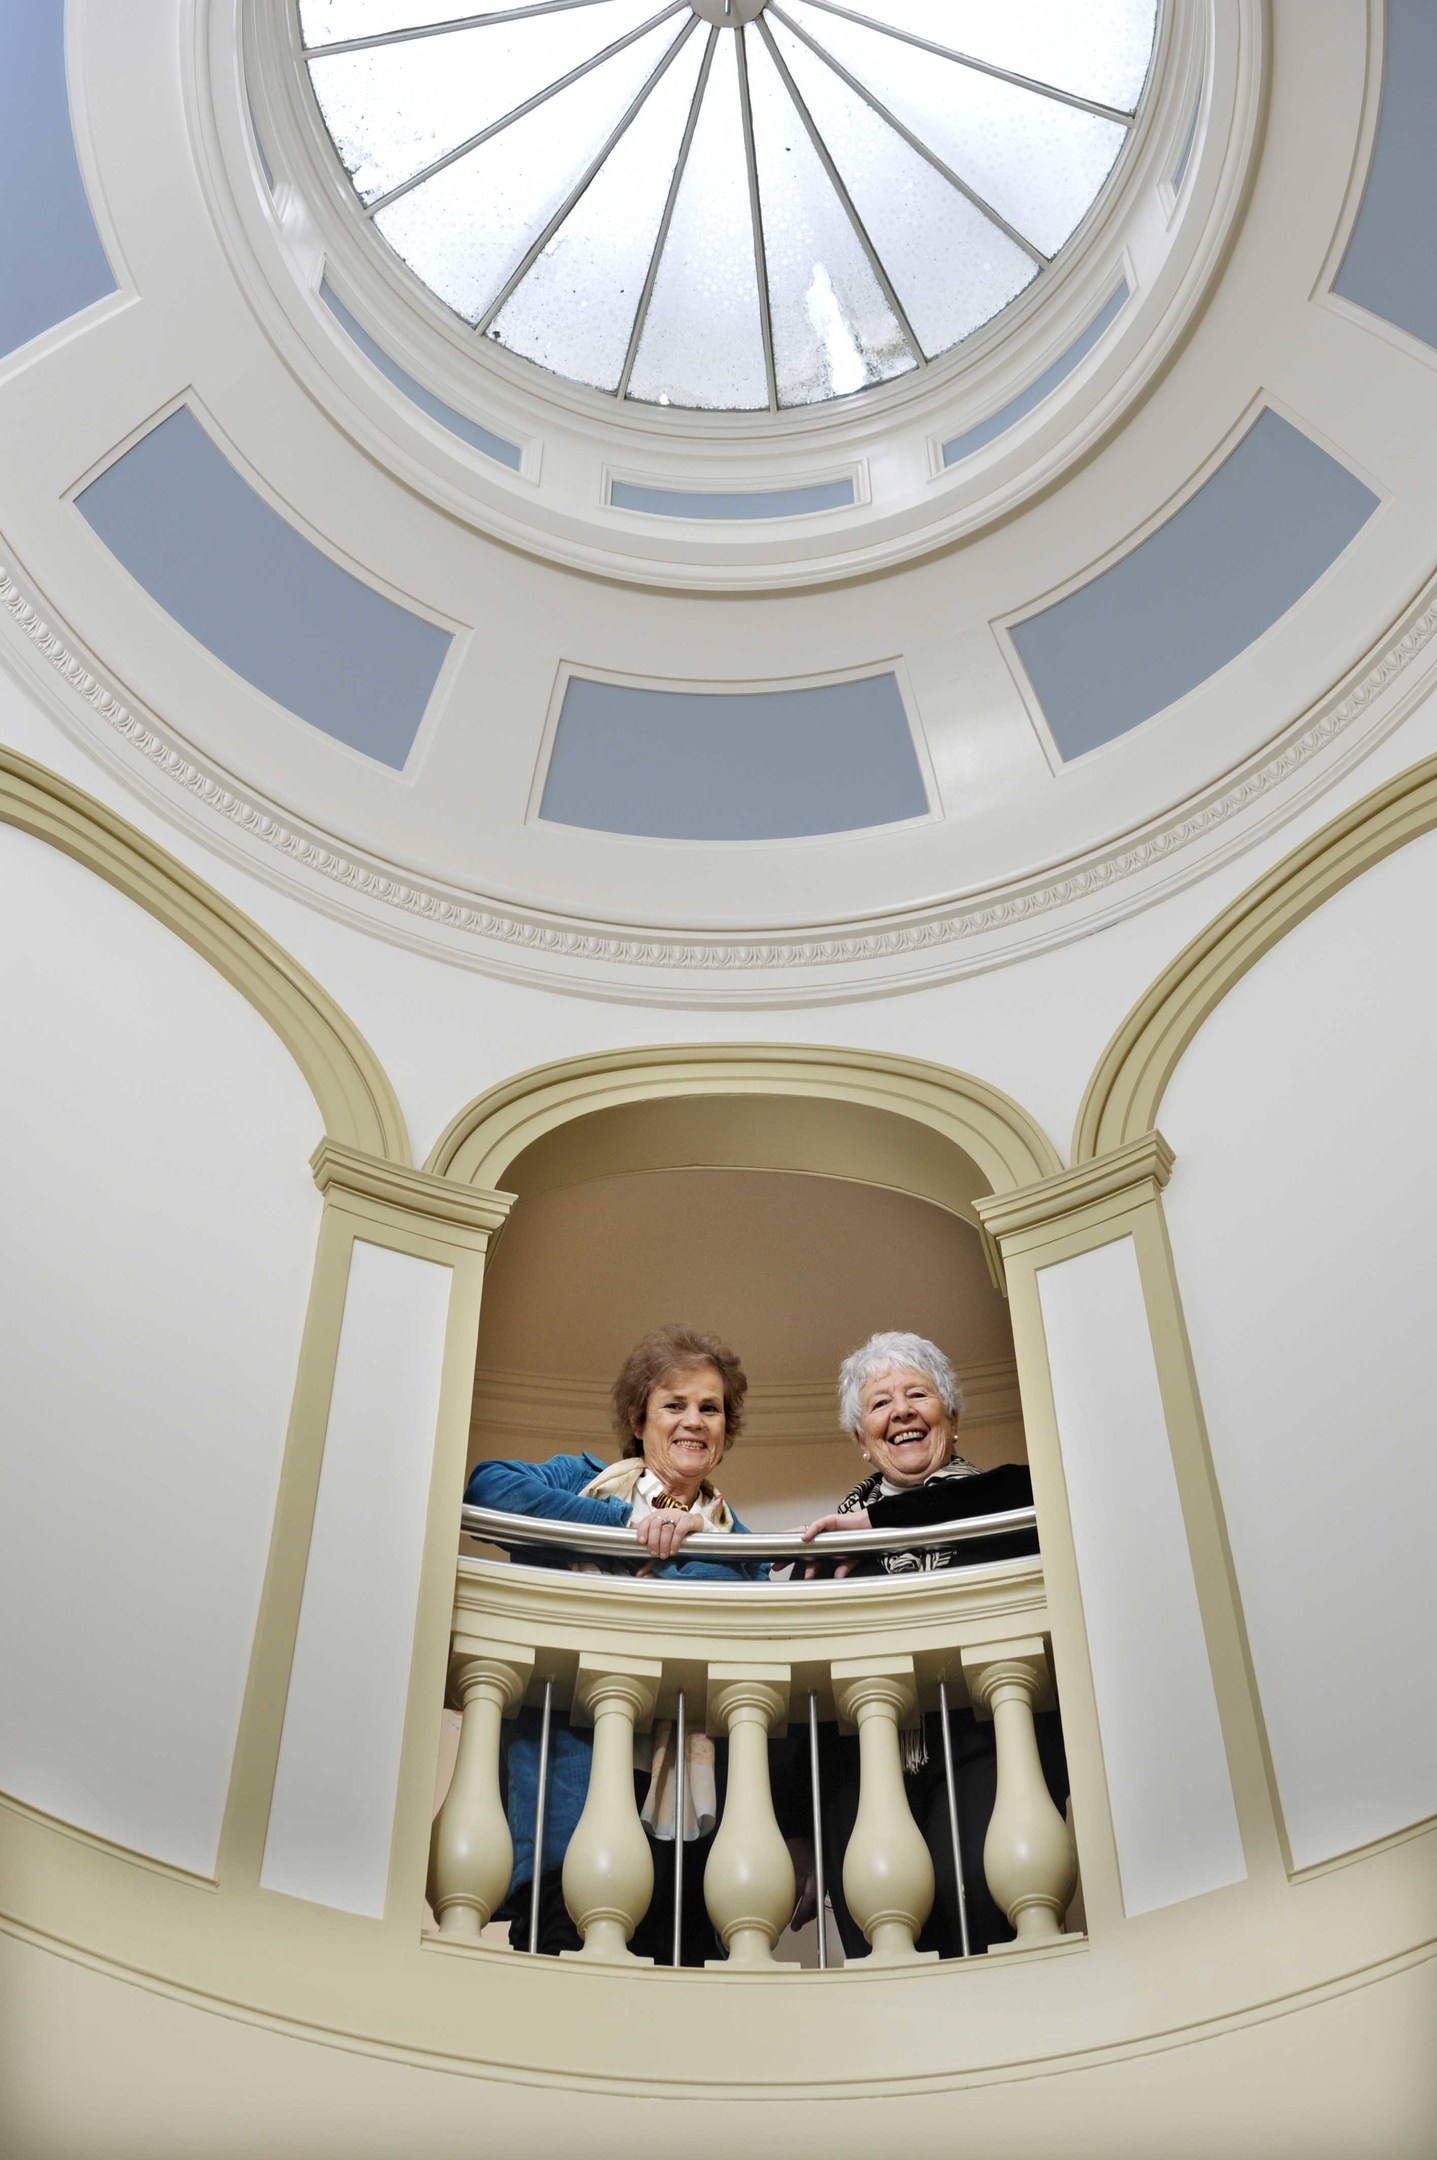 Scotland’s new National Centre for Children’s Literature and Storytelling Centre, and pictured in Moat Brae House’s cupula gallery are Peter Pan Moat Brae Trust chairman Dame Barbara Kelly (right) and project director Cathy Agnew. (Photo: Colin Hattersley)
